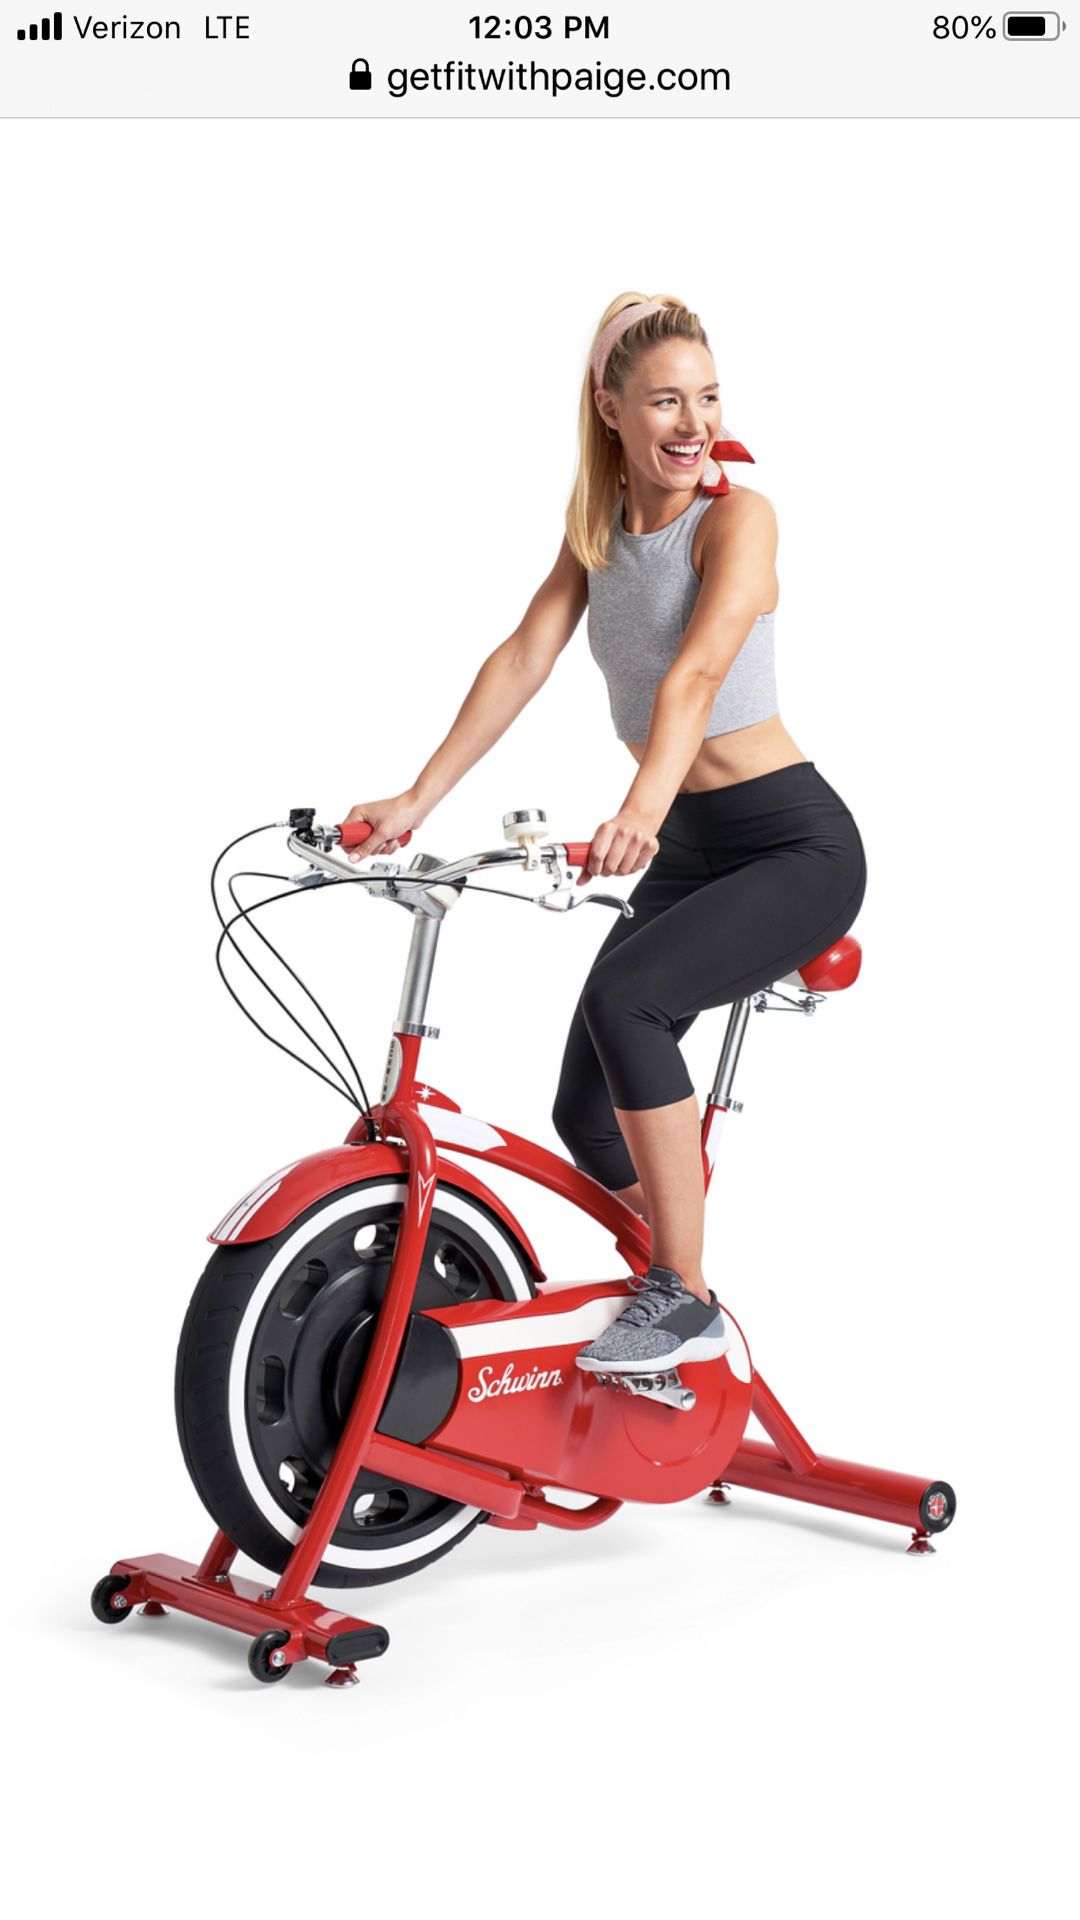 Schwinn Beach Cruiser Stationary Exercise Bike - media rack and cup holder included but not pictured